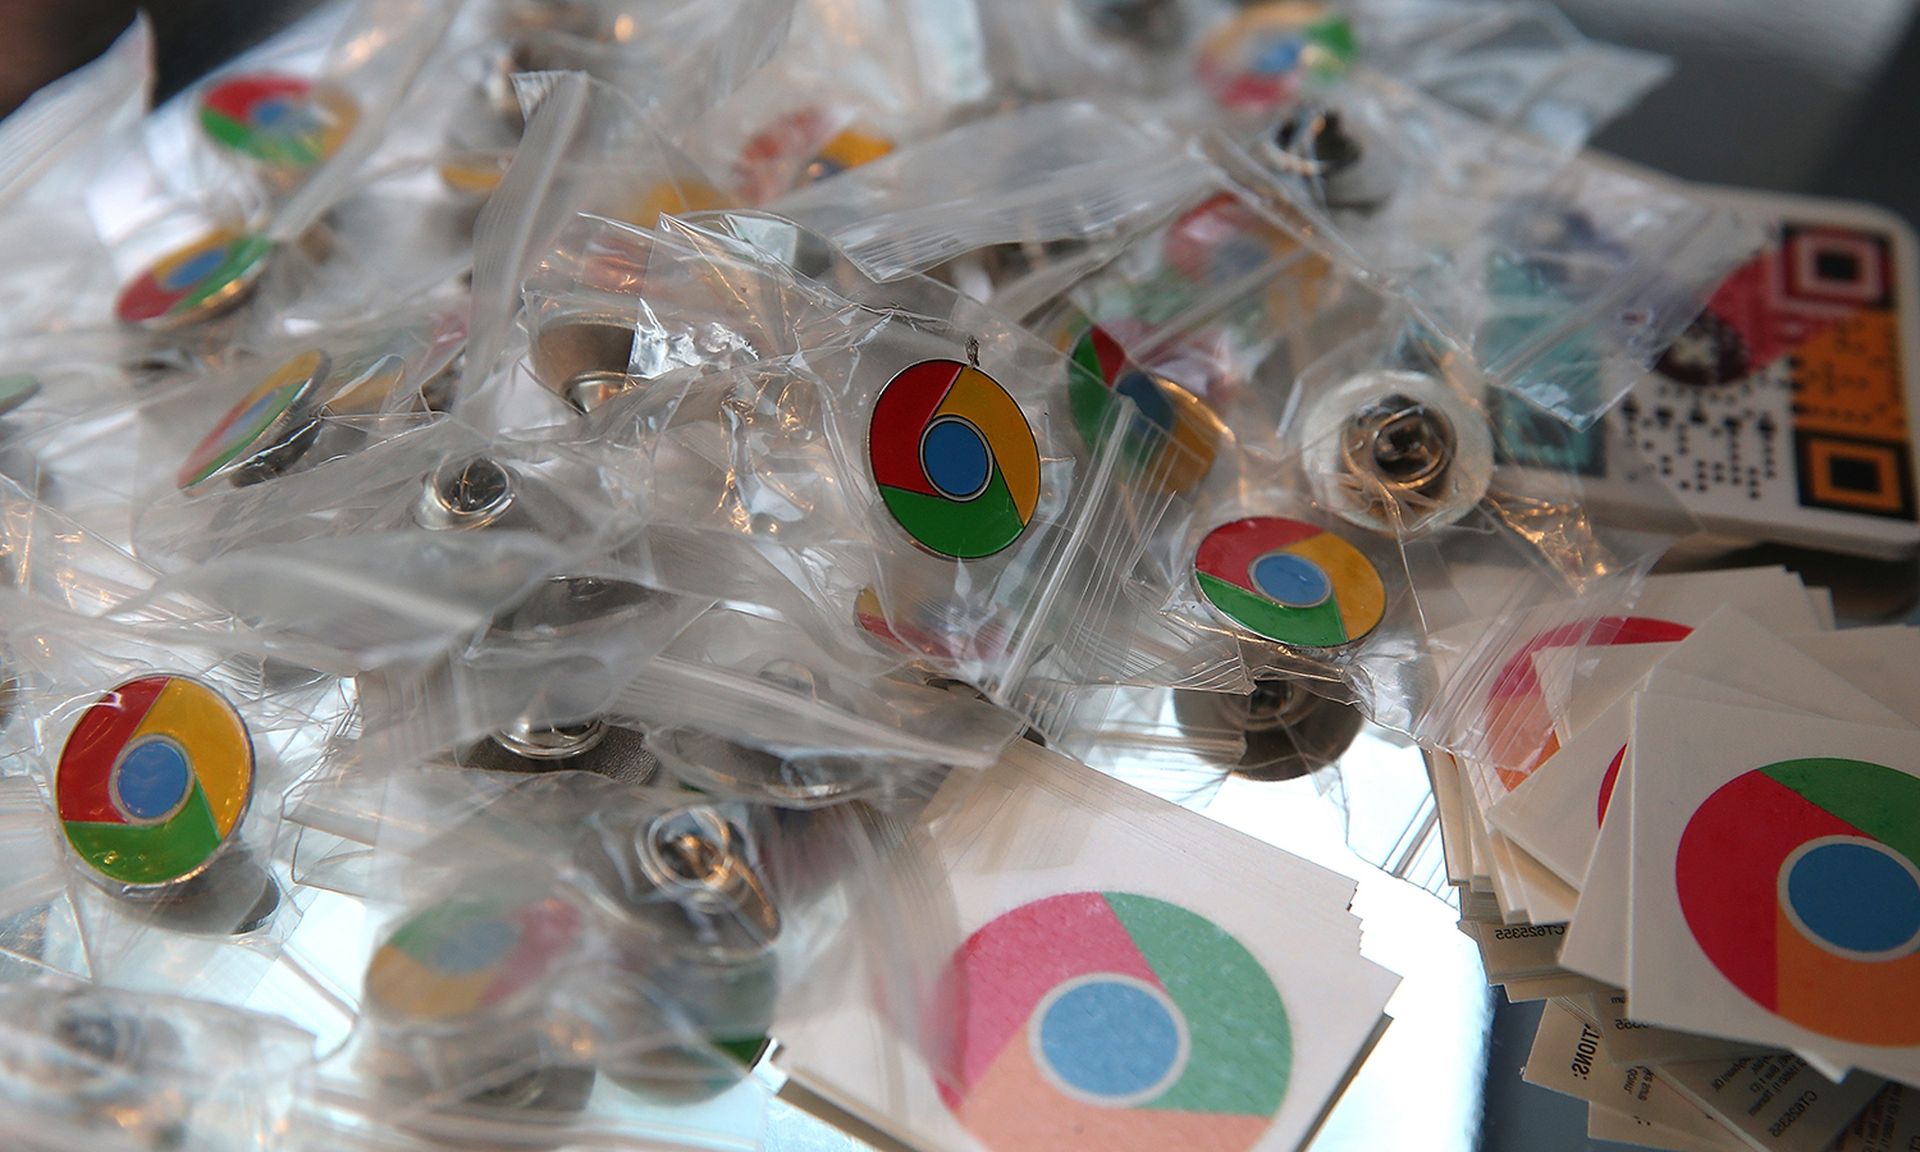 Google Chrome pins and stickers are displayed during the Google I/O developers conference at the Moscone Center on May 15, 2013, in San Francisco. (Photo by Justin Sullivan/Getty Images)